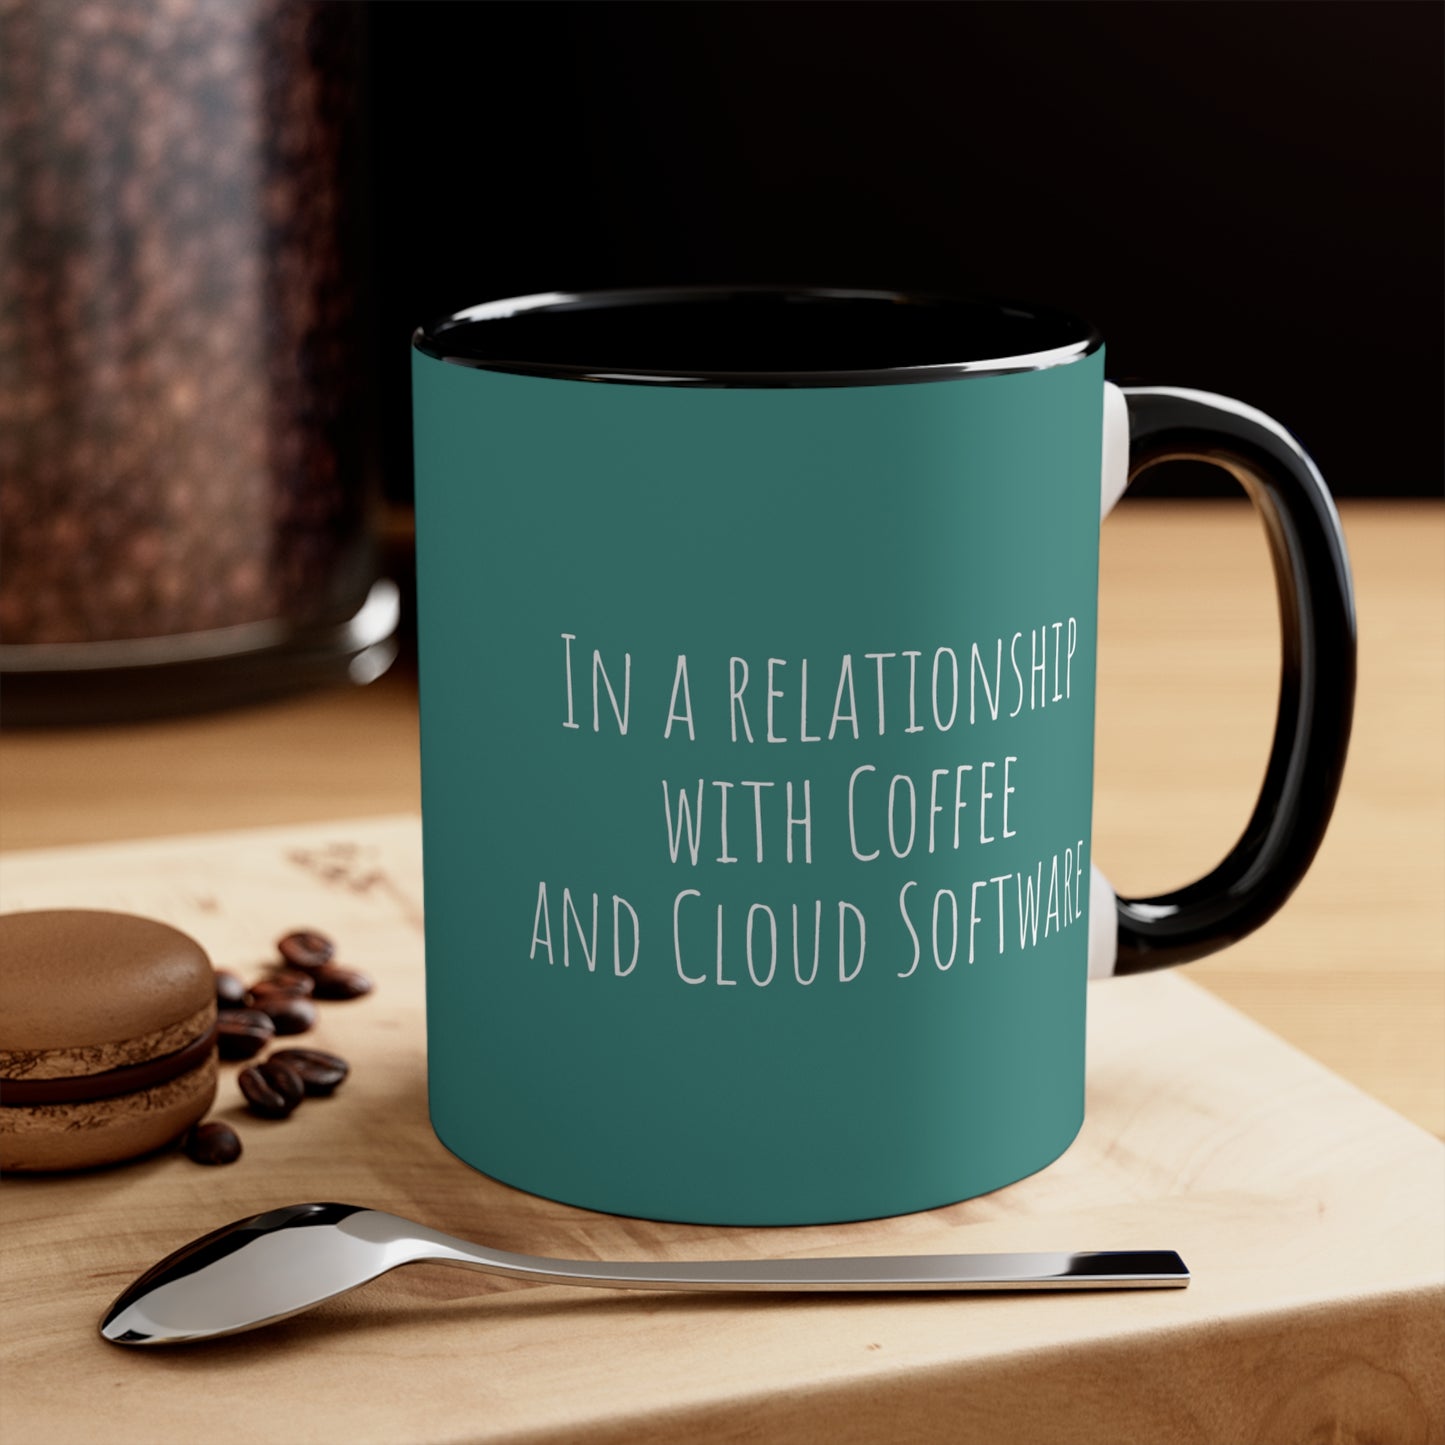 In a relationship with Coffee and Cloud Software